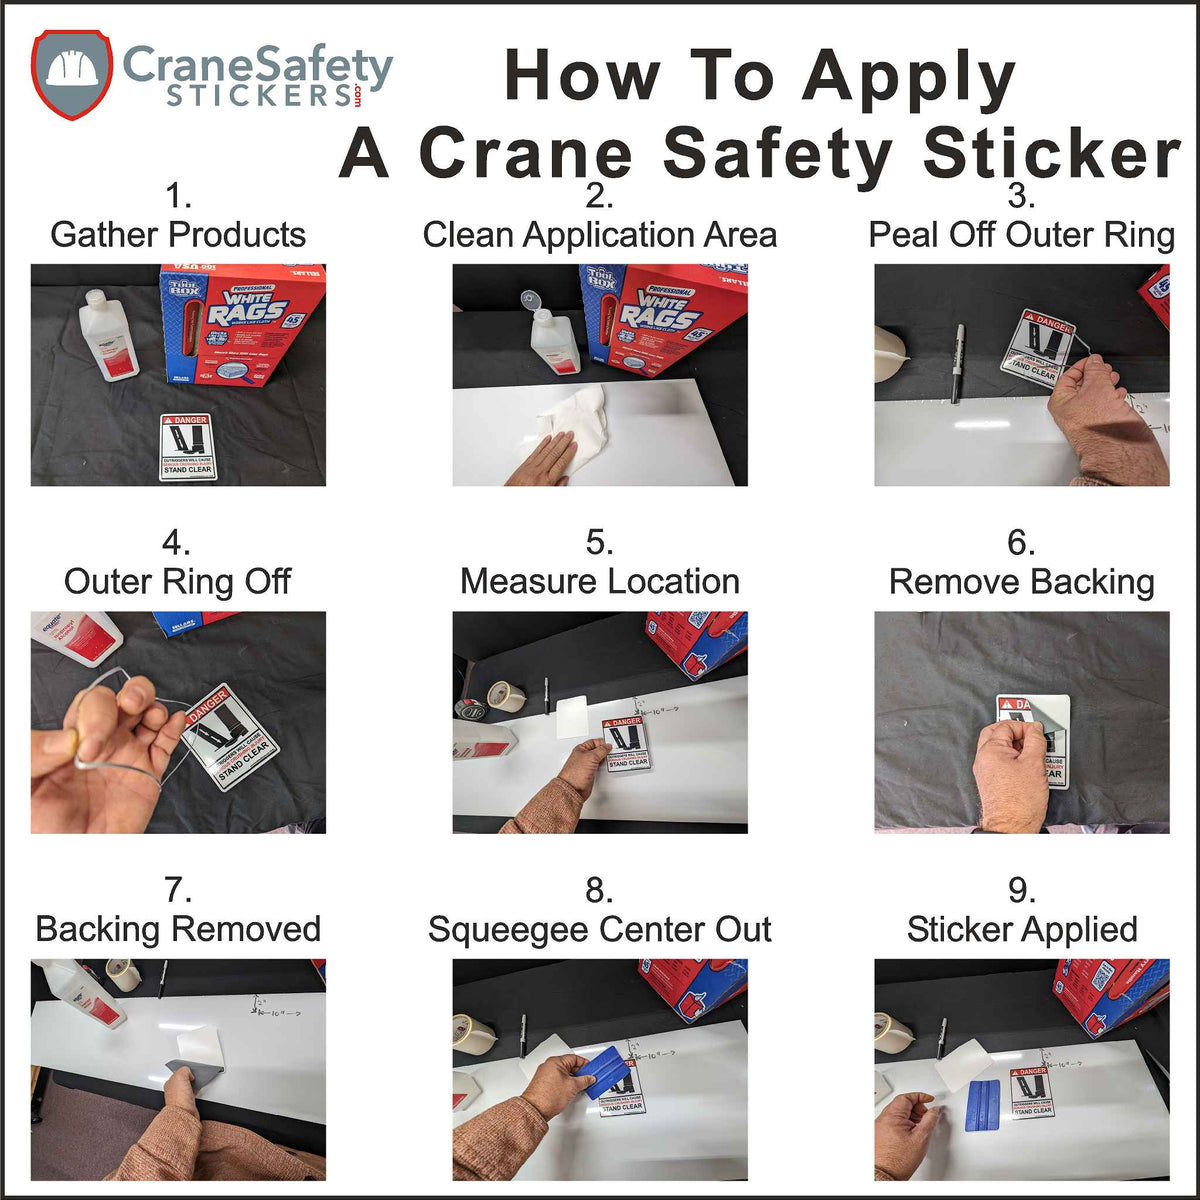 Directions on how to apply our custom decals. With this decal you send us the text and image you would like to be printed. We design the sticker, send you a proof and once the proof is okayed by you we will print and ship.